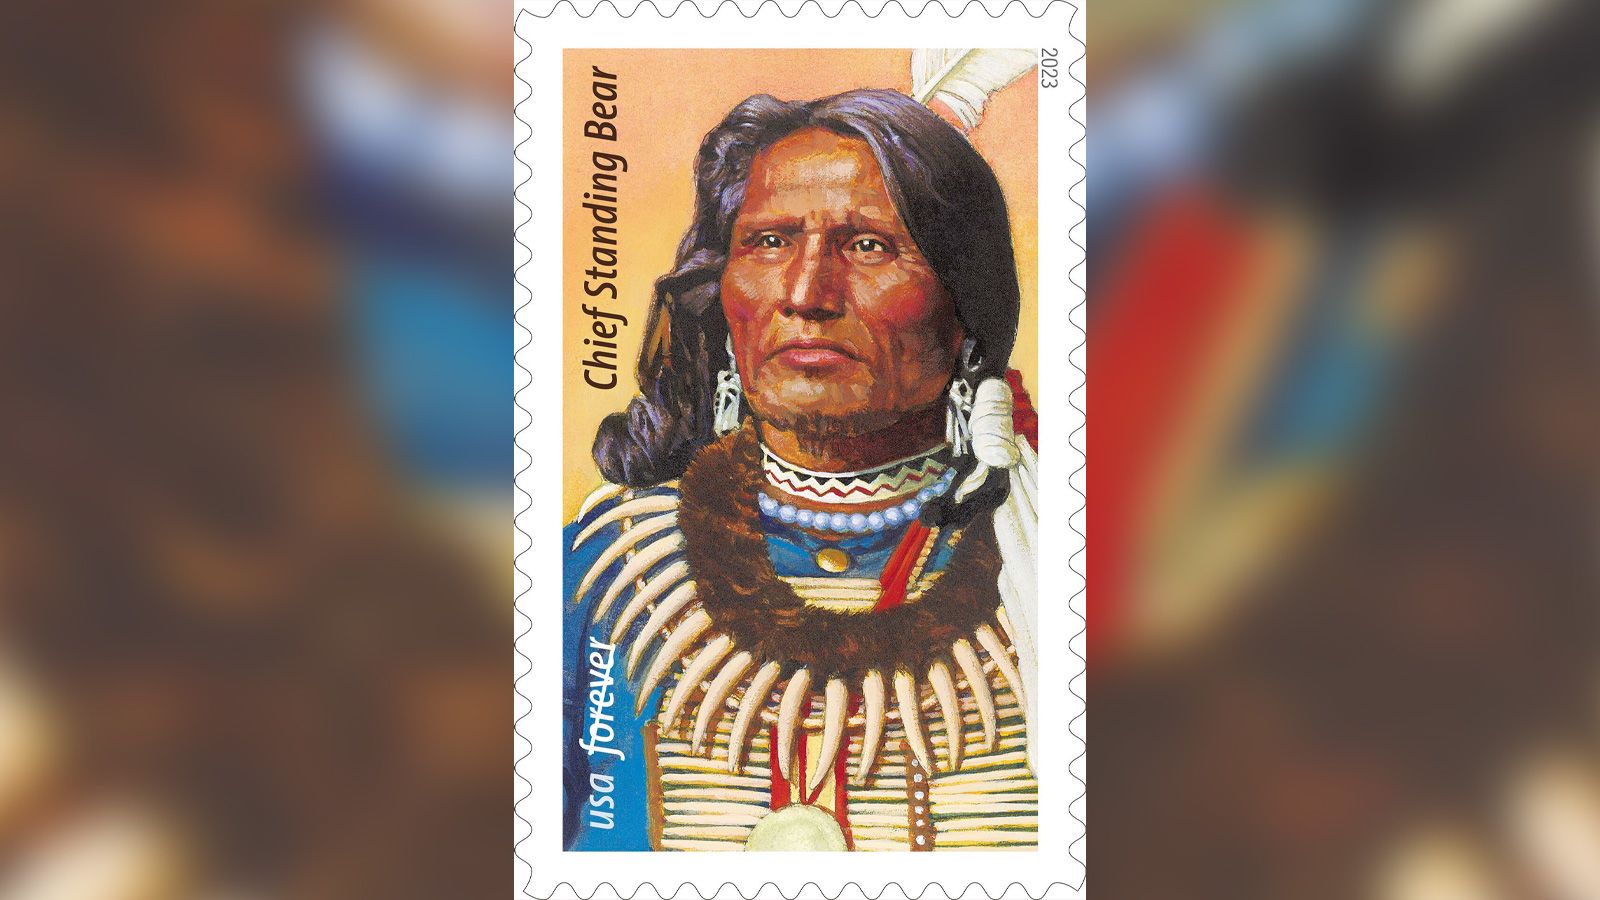 Chief Standing Bear, Native American civil rights icon, is honored